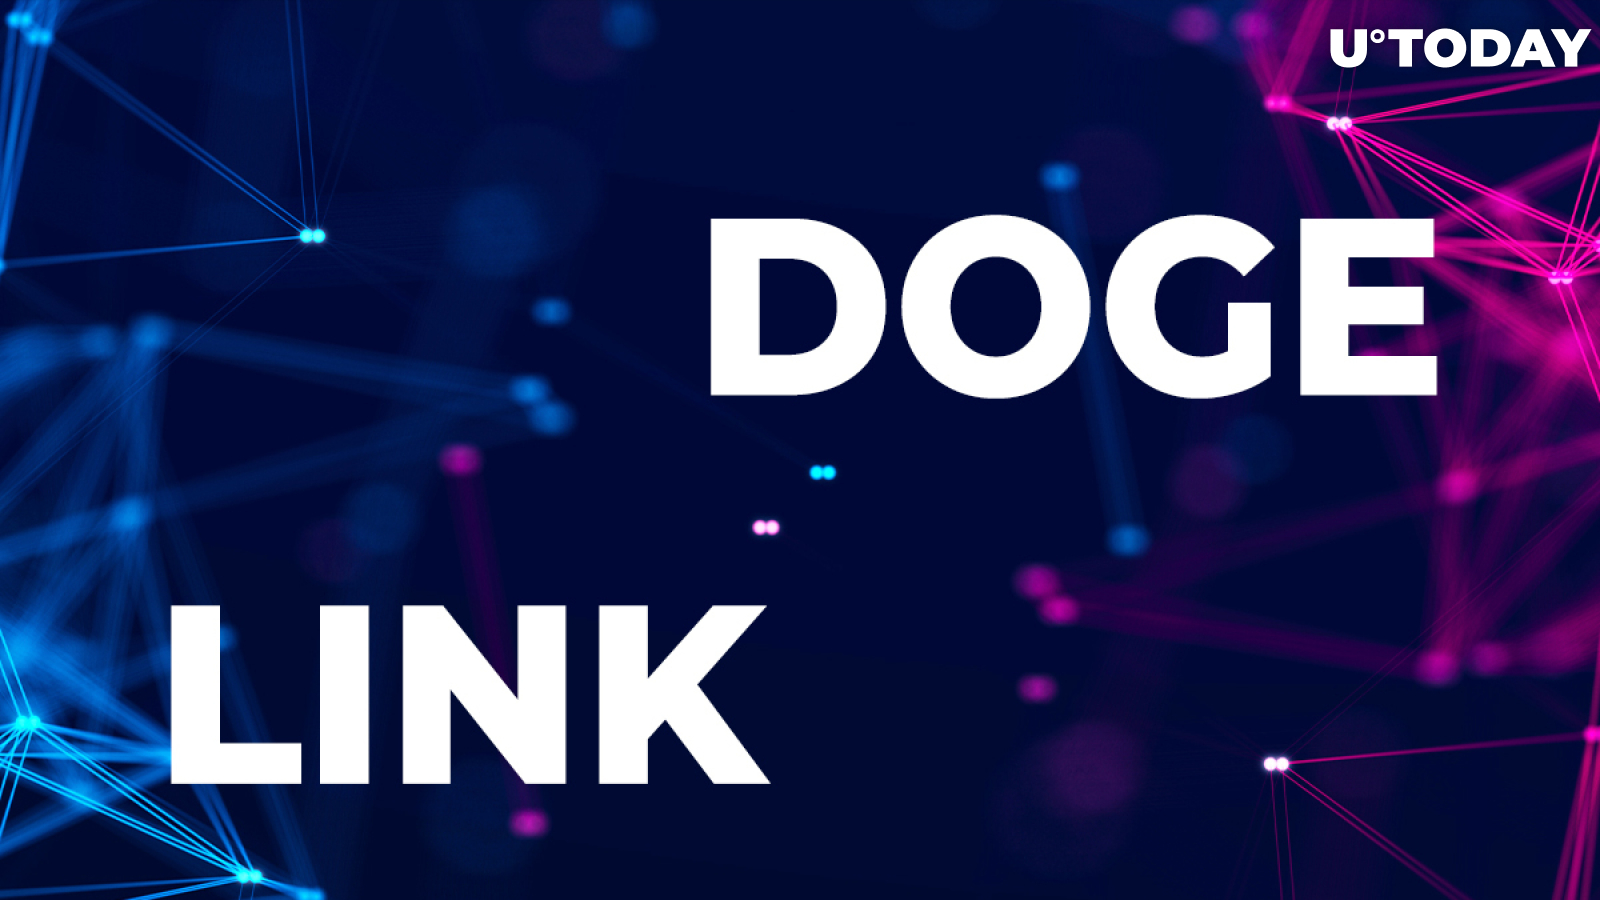 Talks of Next Altseason Increase as DOGE and LINK Catch Market’s Attention